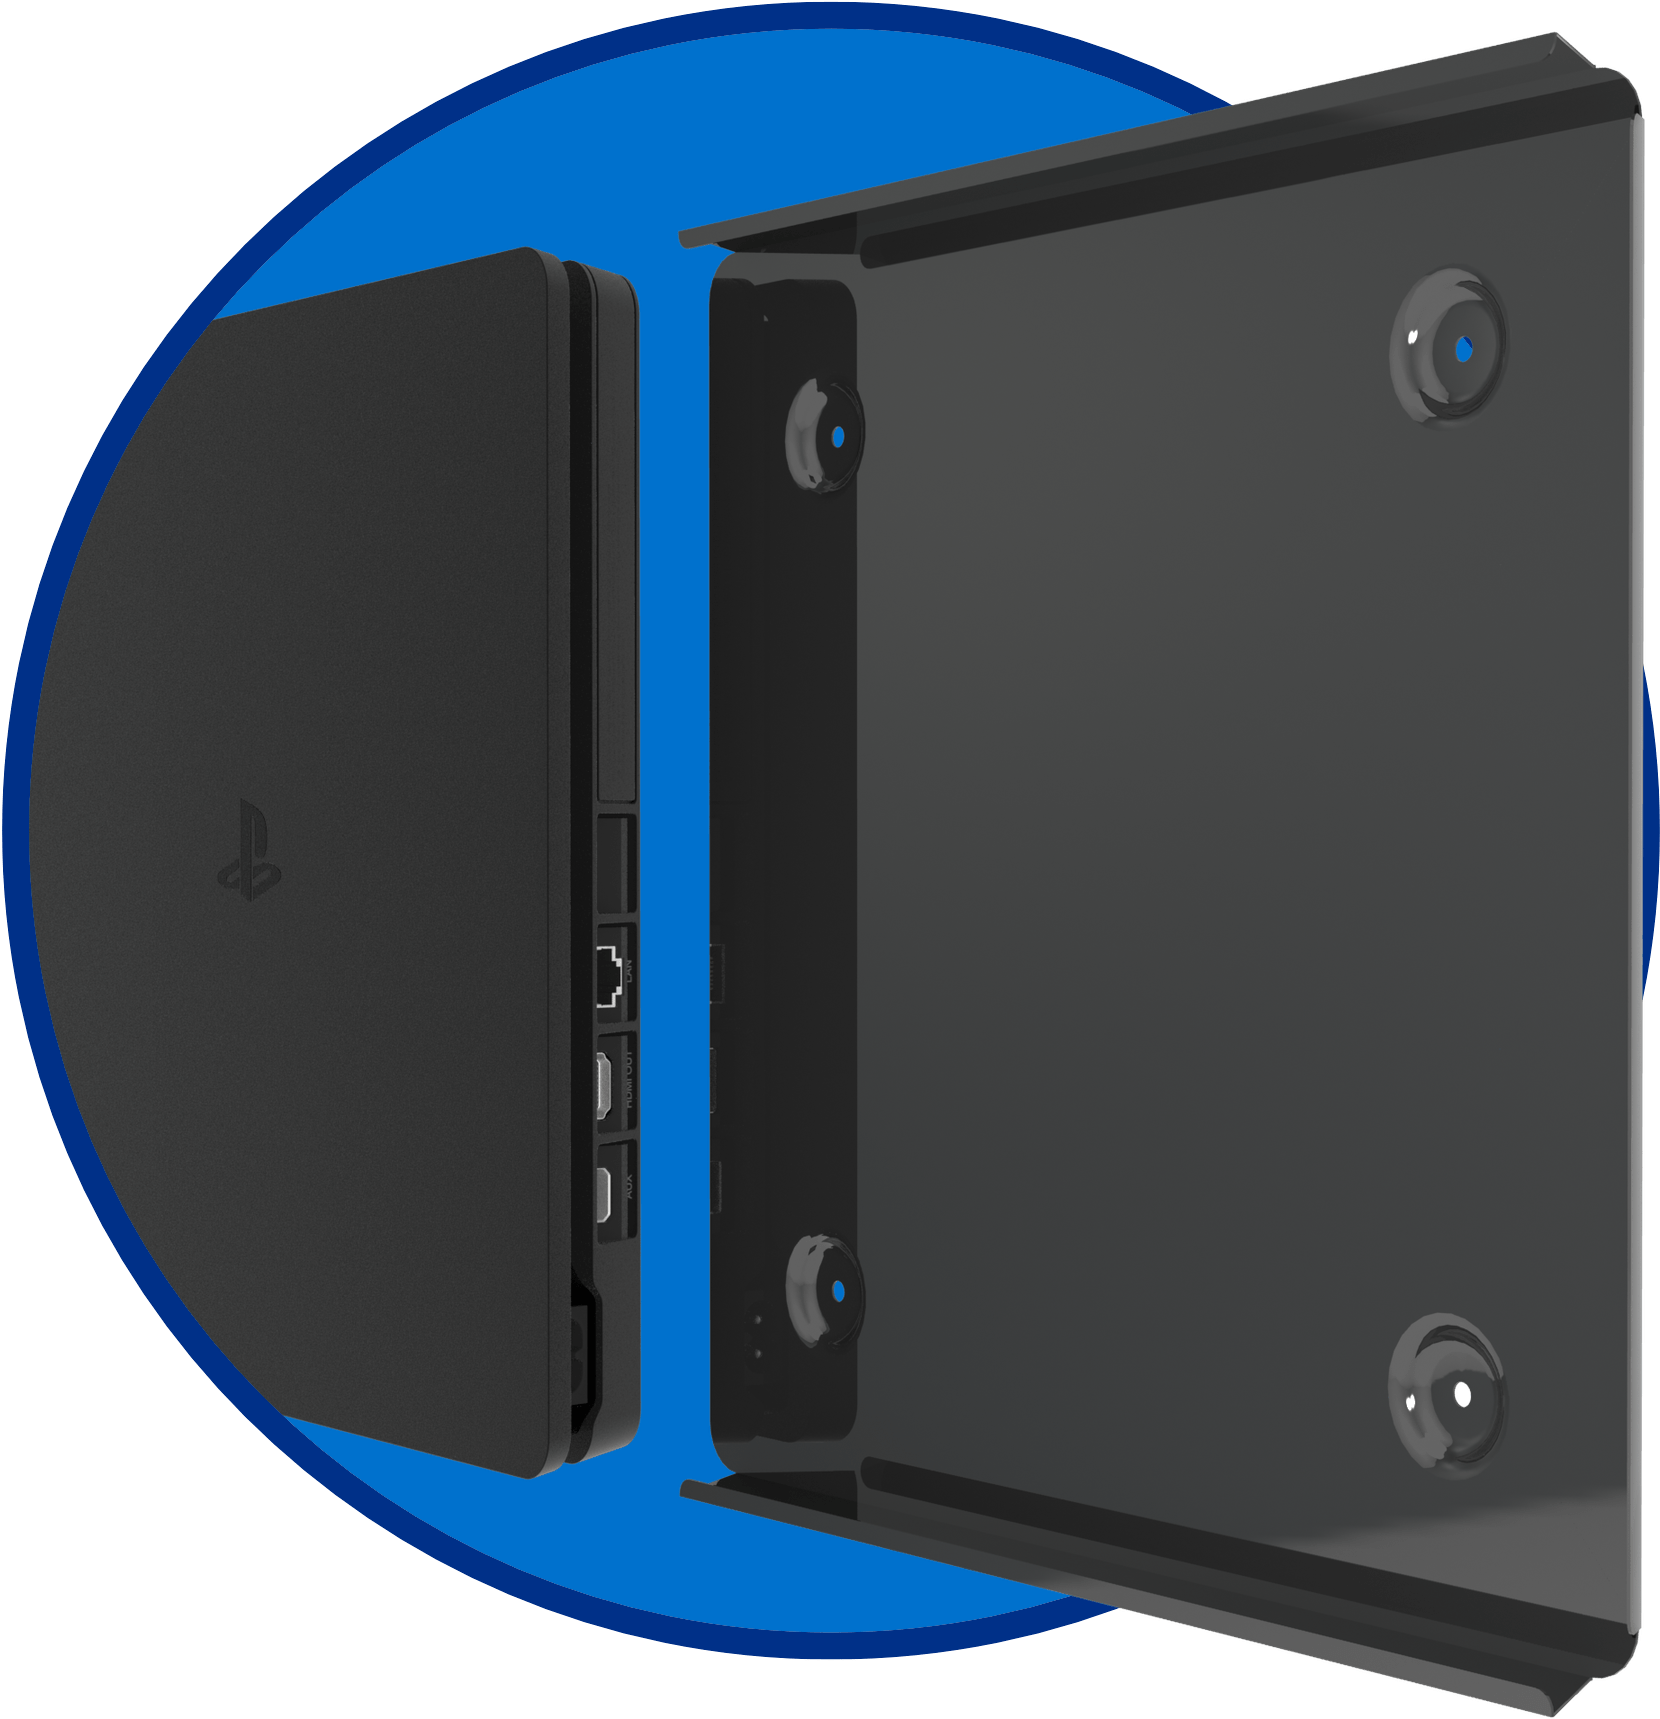 A Black Rectangular Device With A Blue Circle